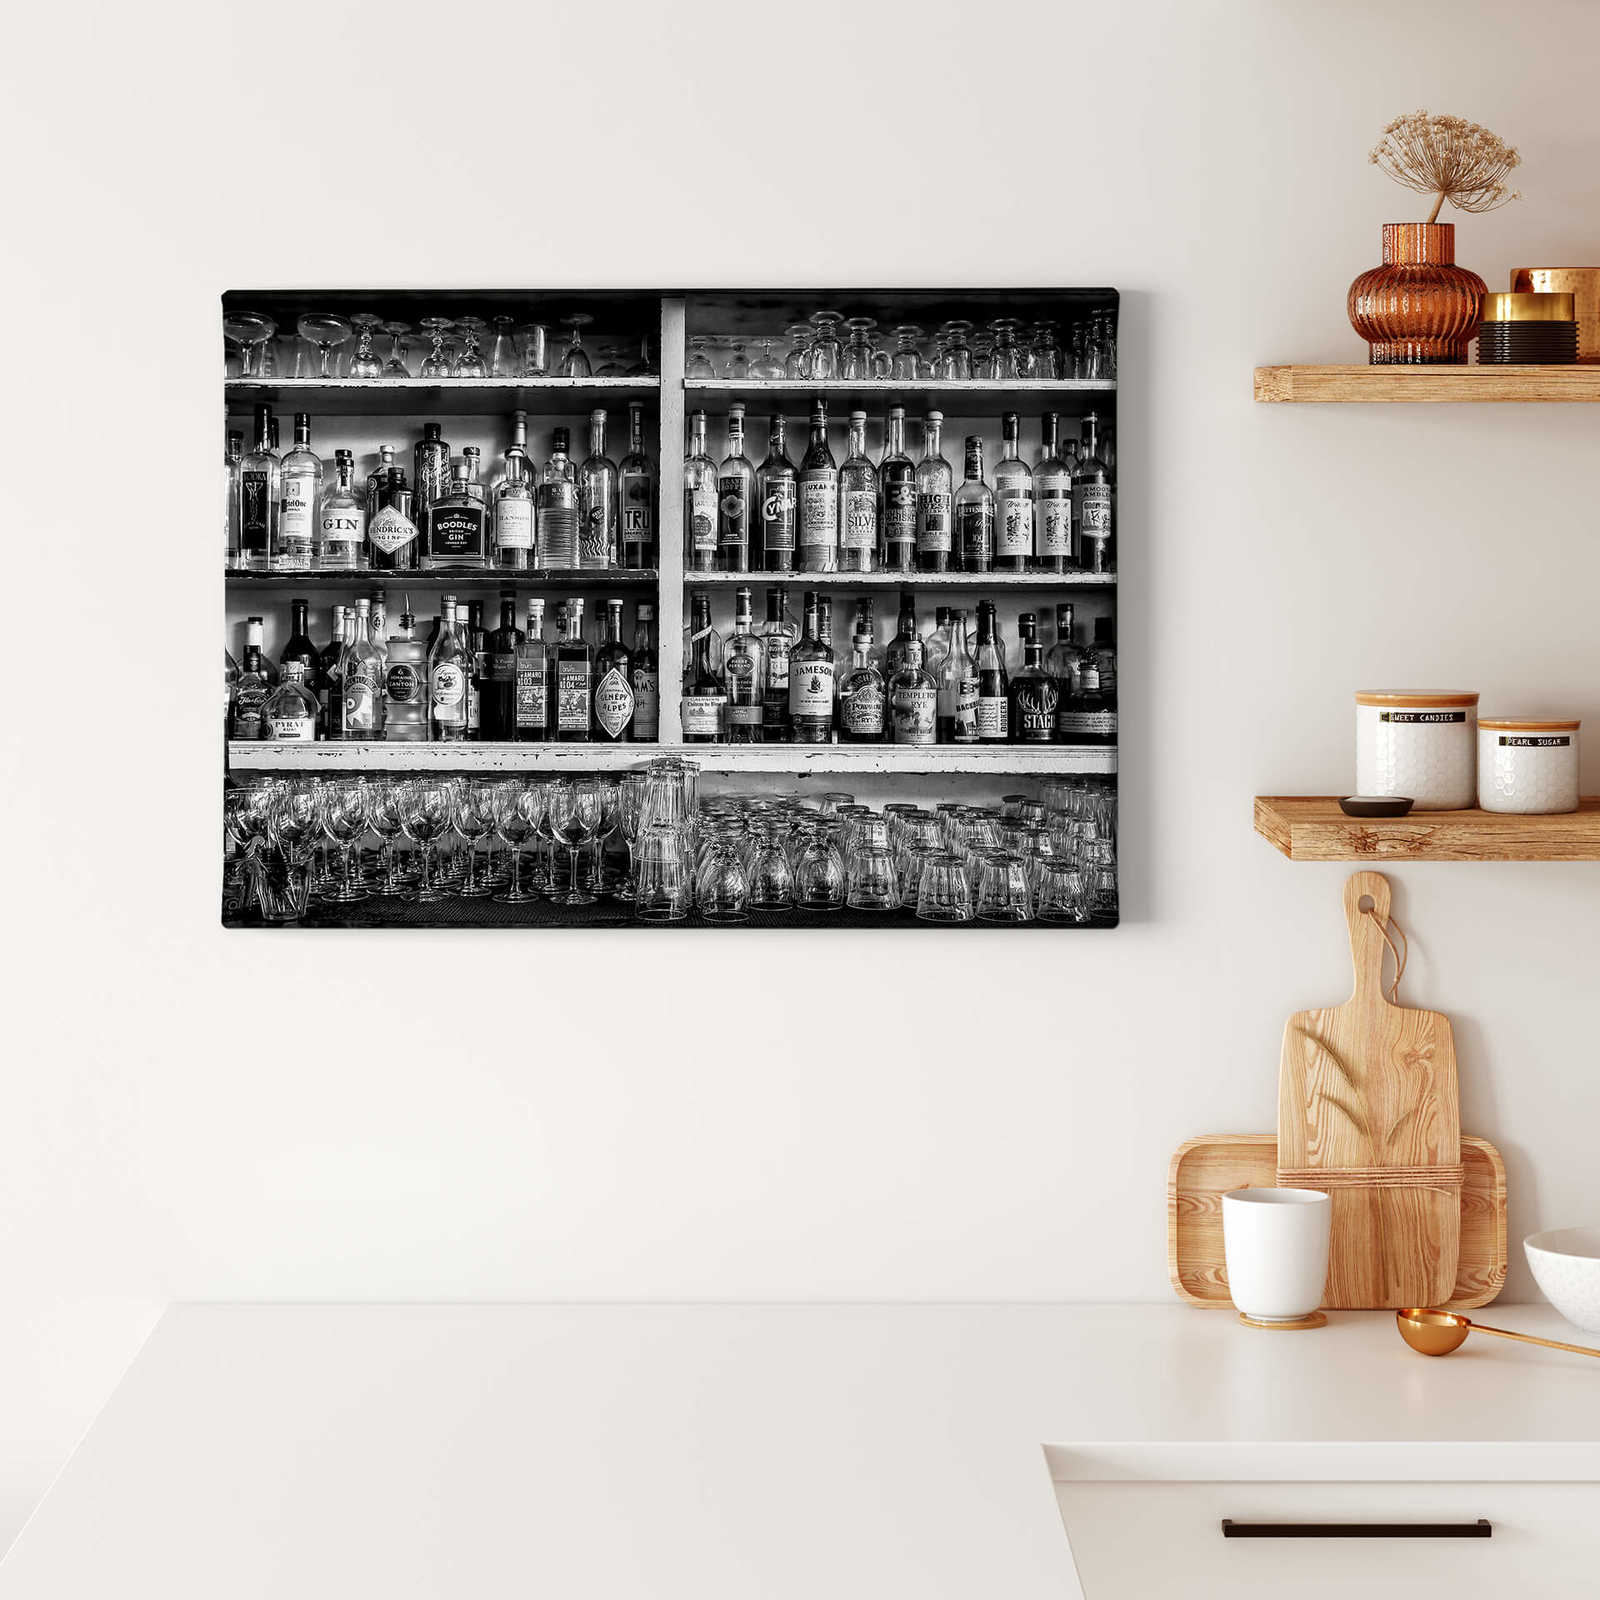             Black and white canvas print bar with bottles and glasses
        